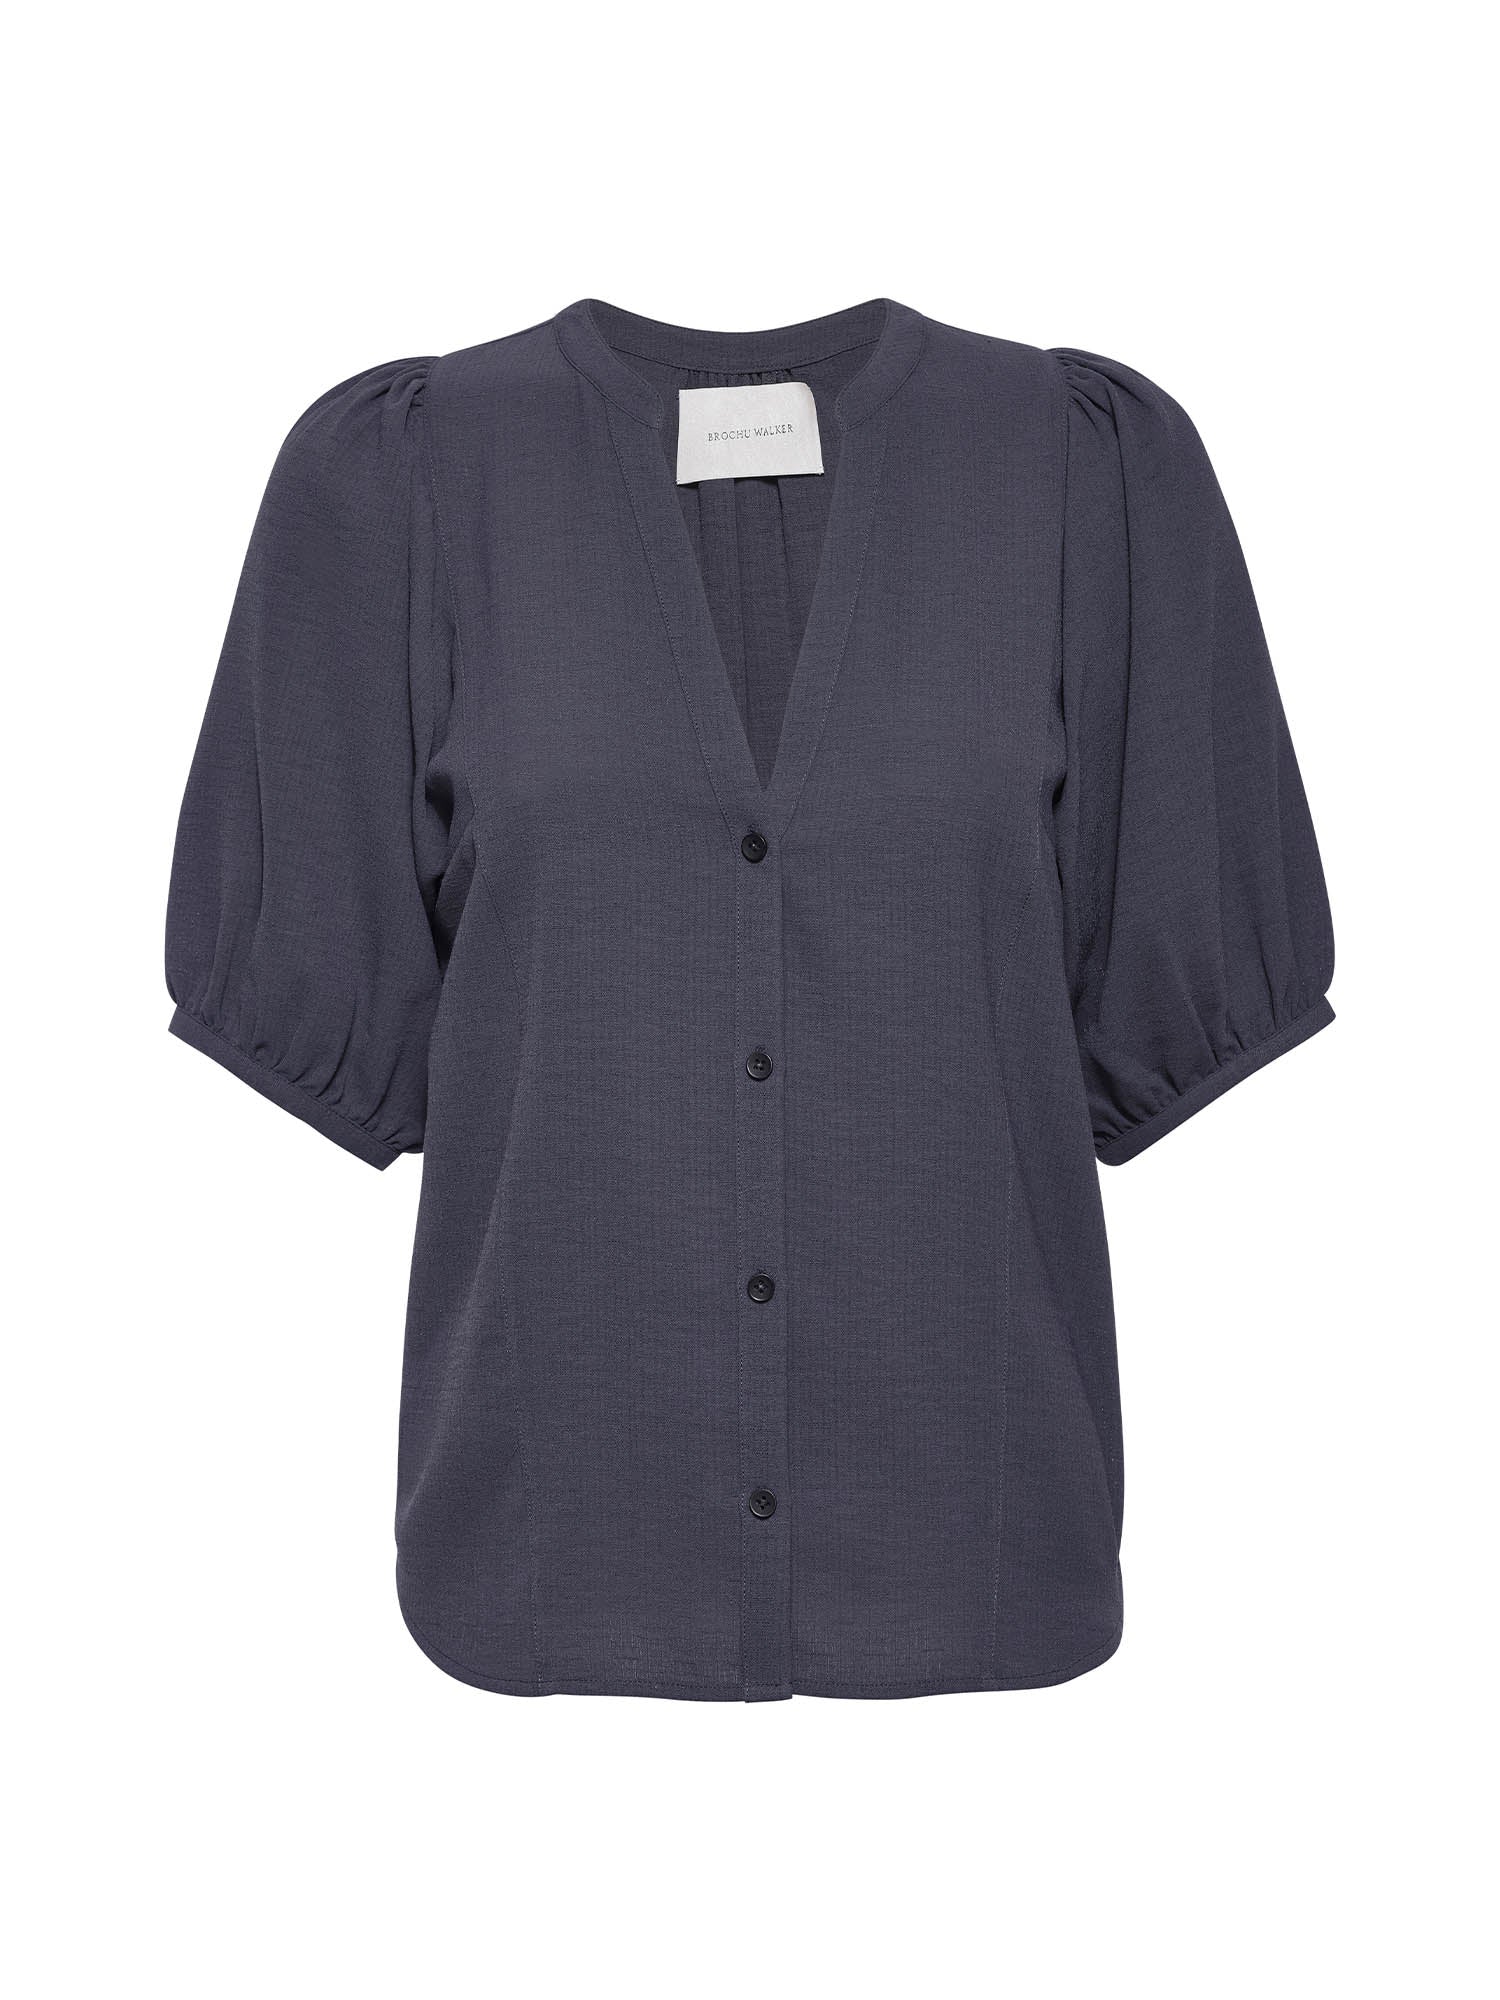 East v-neck gray blouse flat view